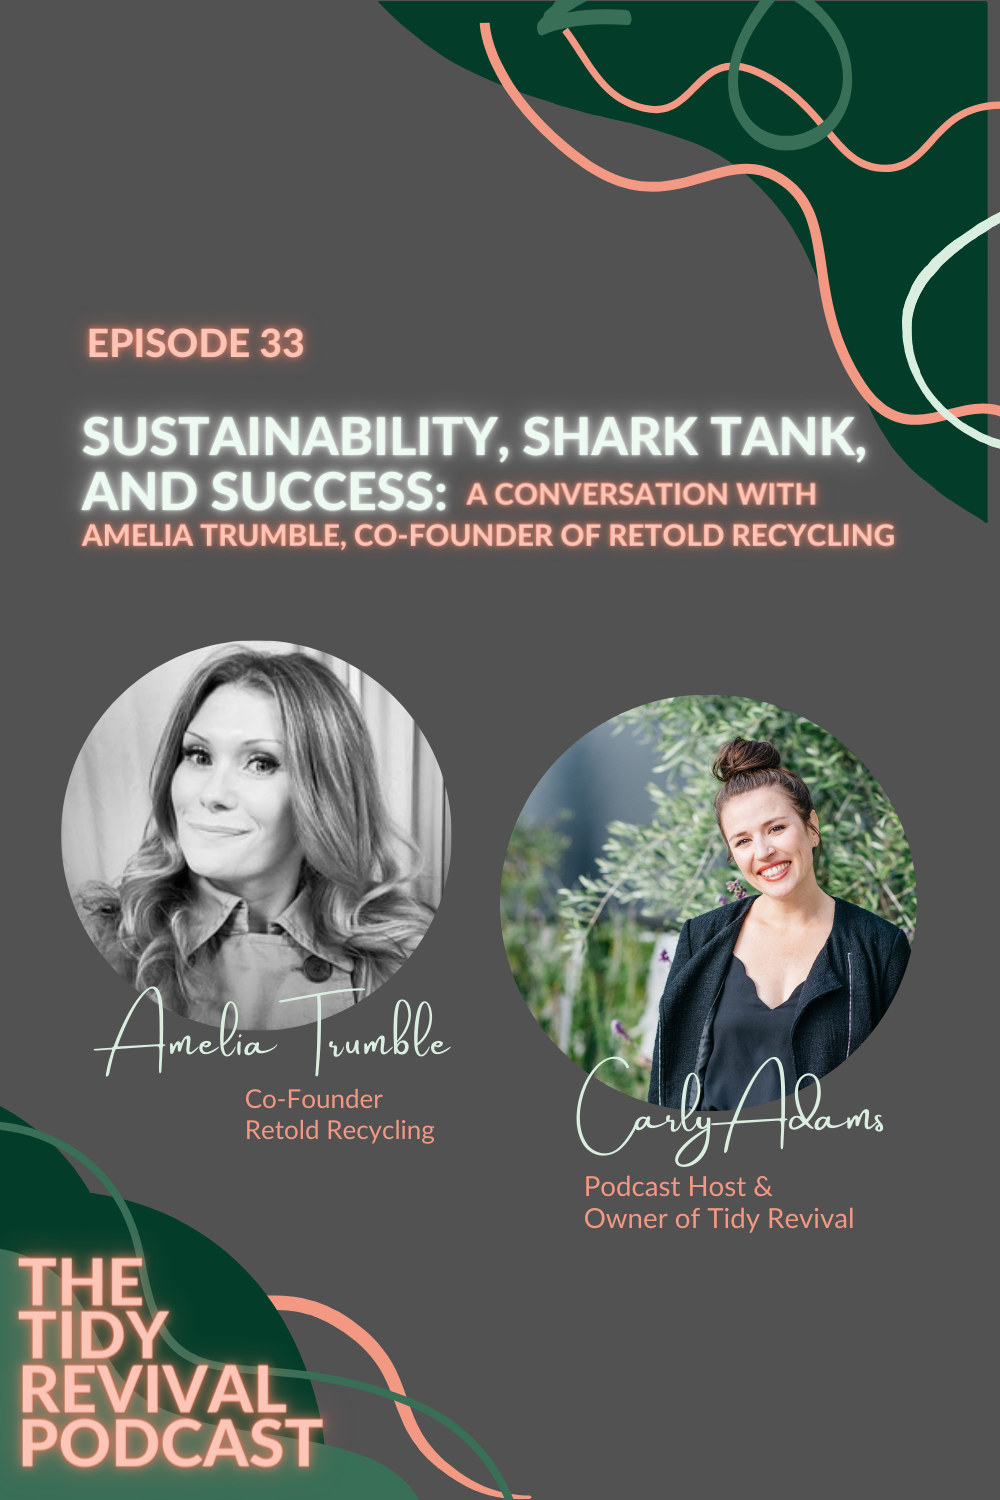 Sustainability, Shark Tank, and Success: Featuring Amelia Trumble